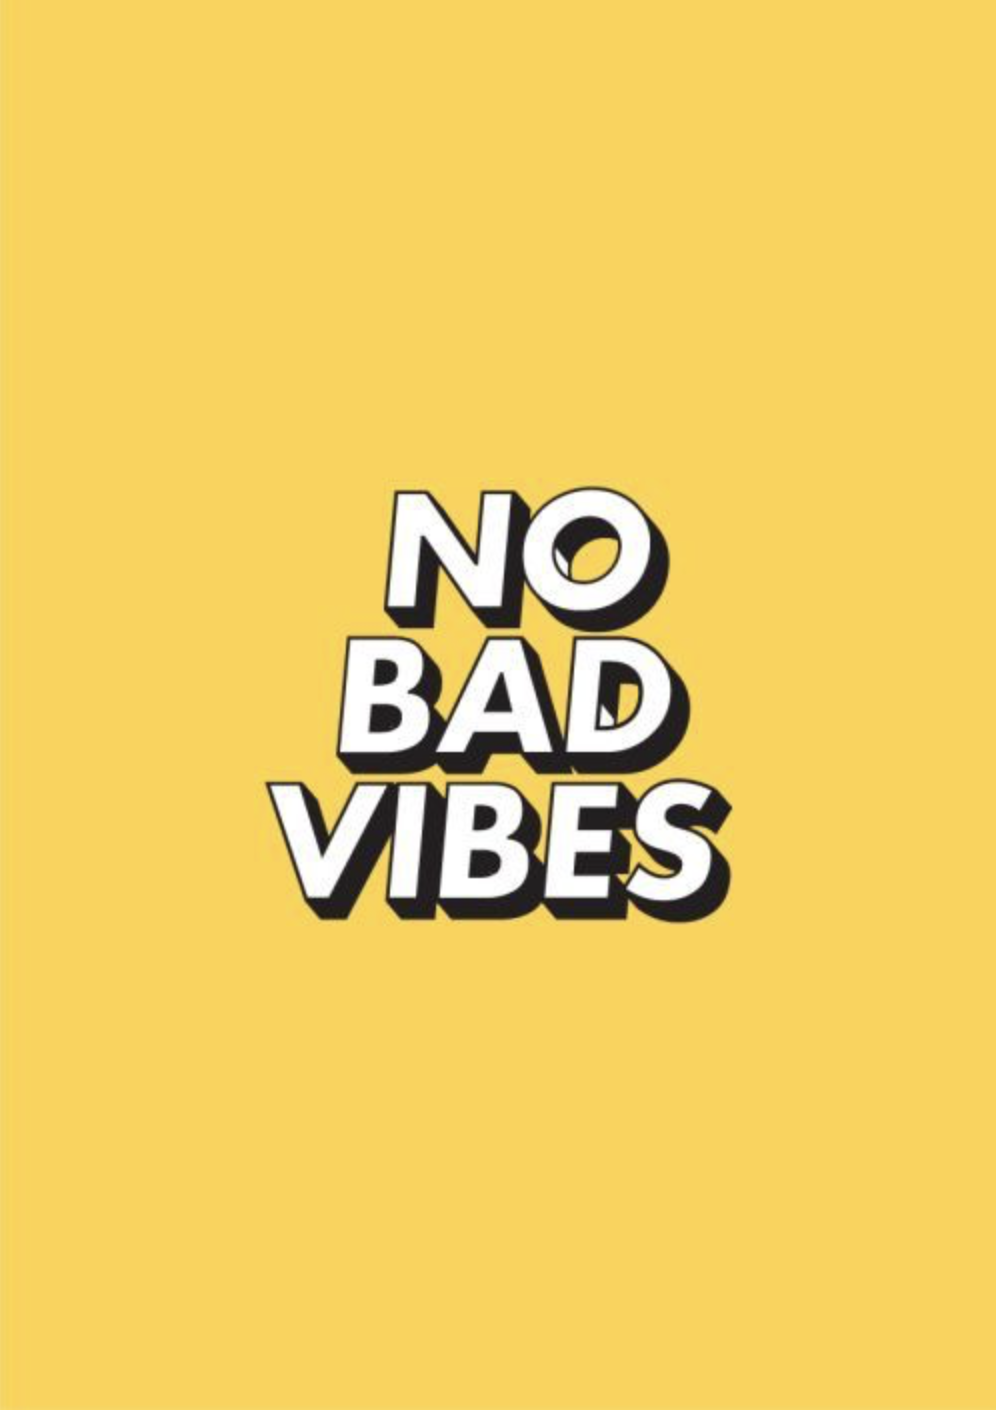 Good Vibes Only Quotes Wallpaper iPhone Wallpaper Know The Vibes